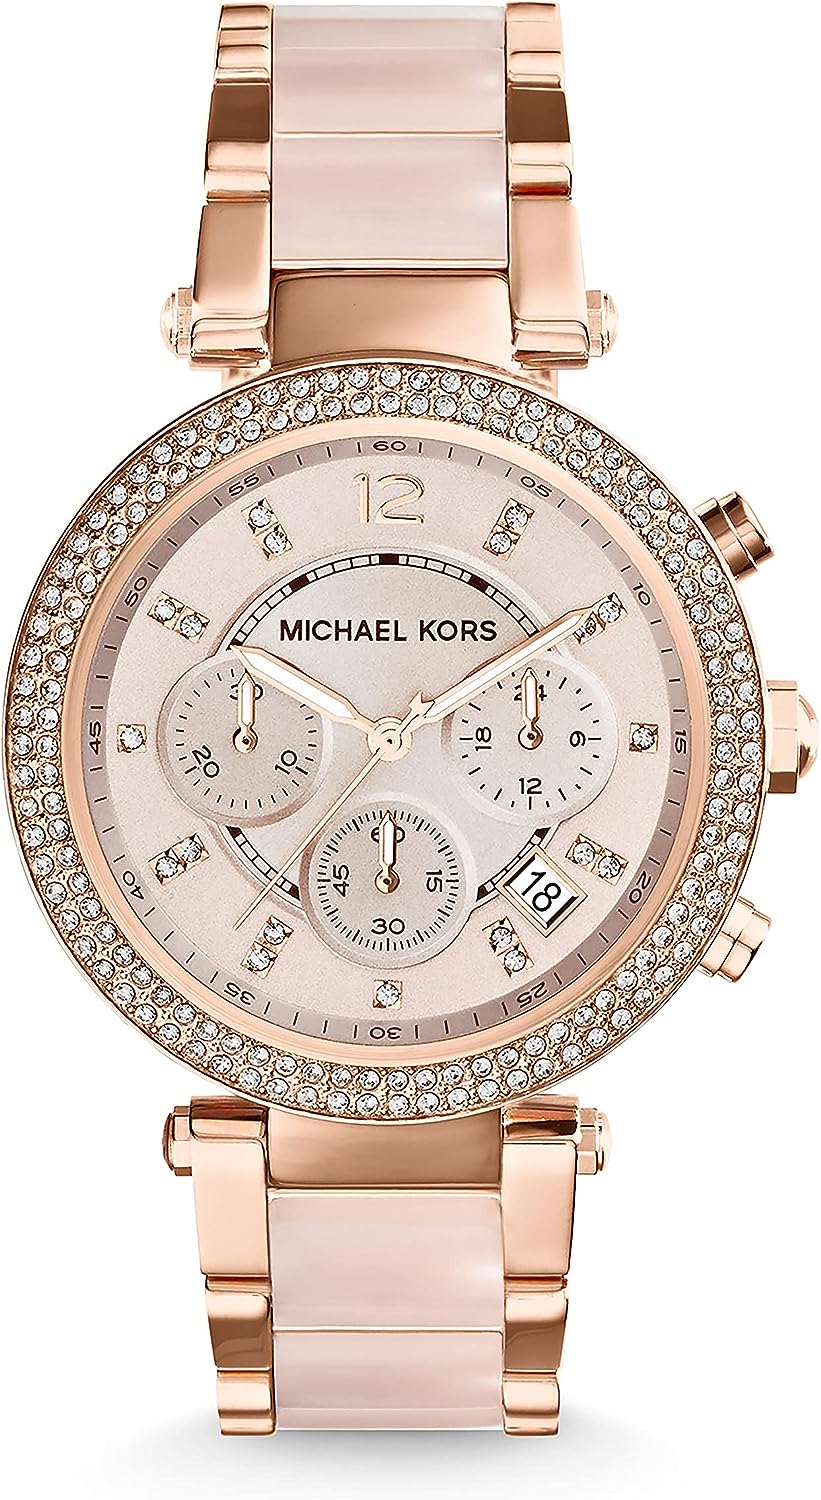 Michael Kors Watch for Women Parker, 39mm case size, Chronograph Movement, Stainless Steel Strap